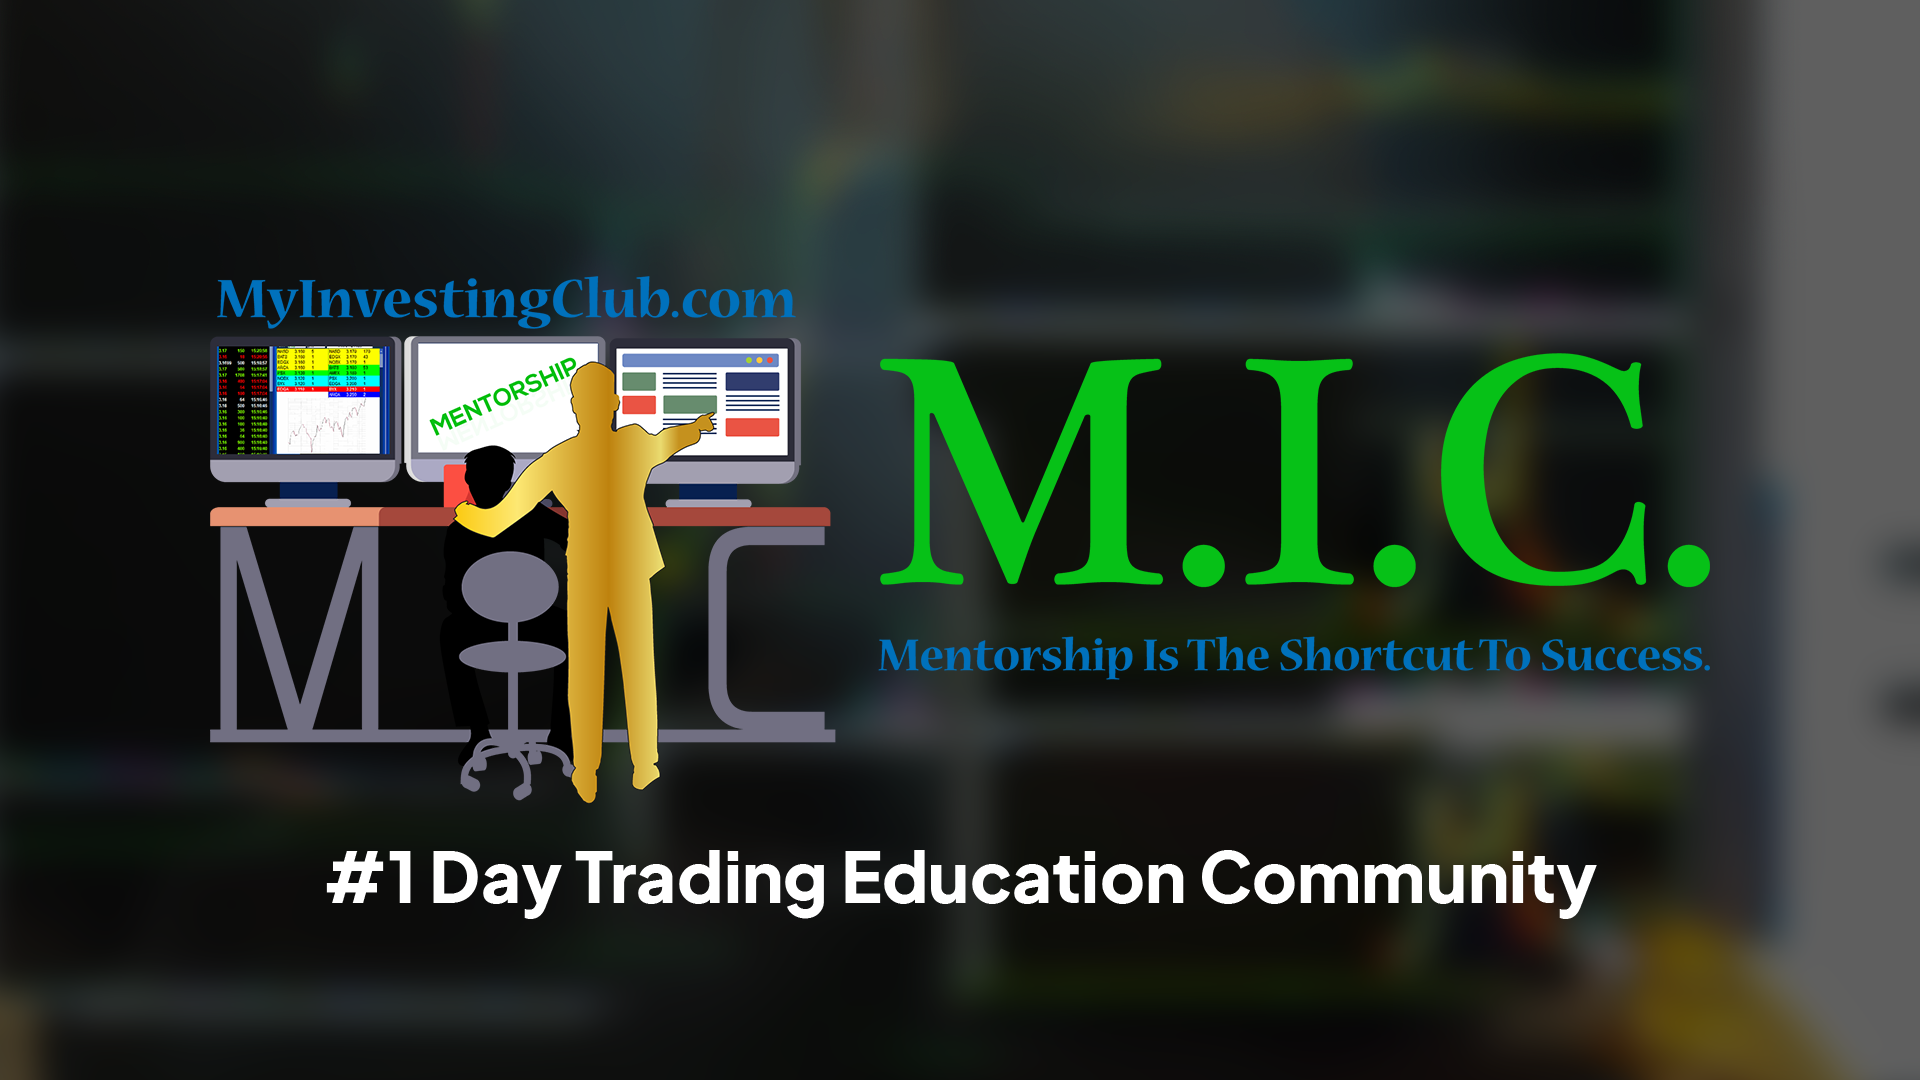 Get Best Intraday Live Trading Webinars With This Chatroom Mentorship Program